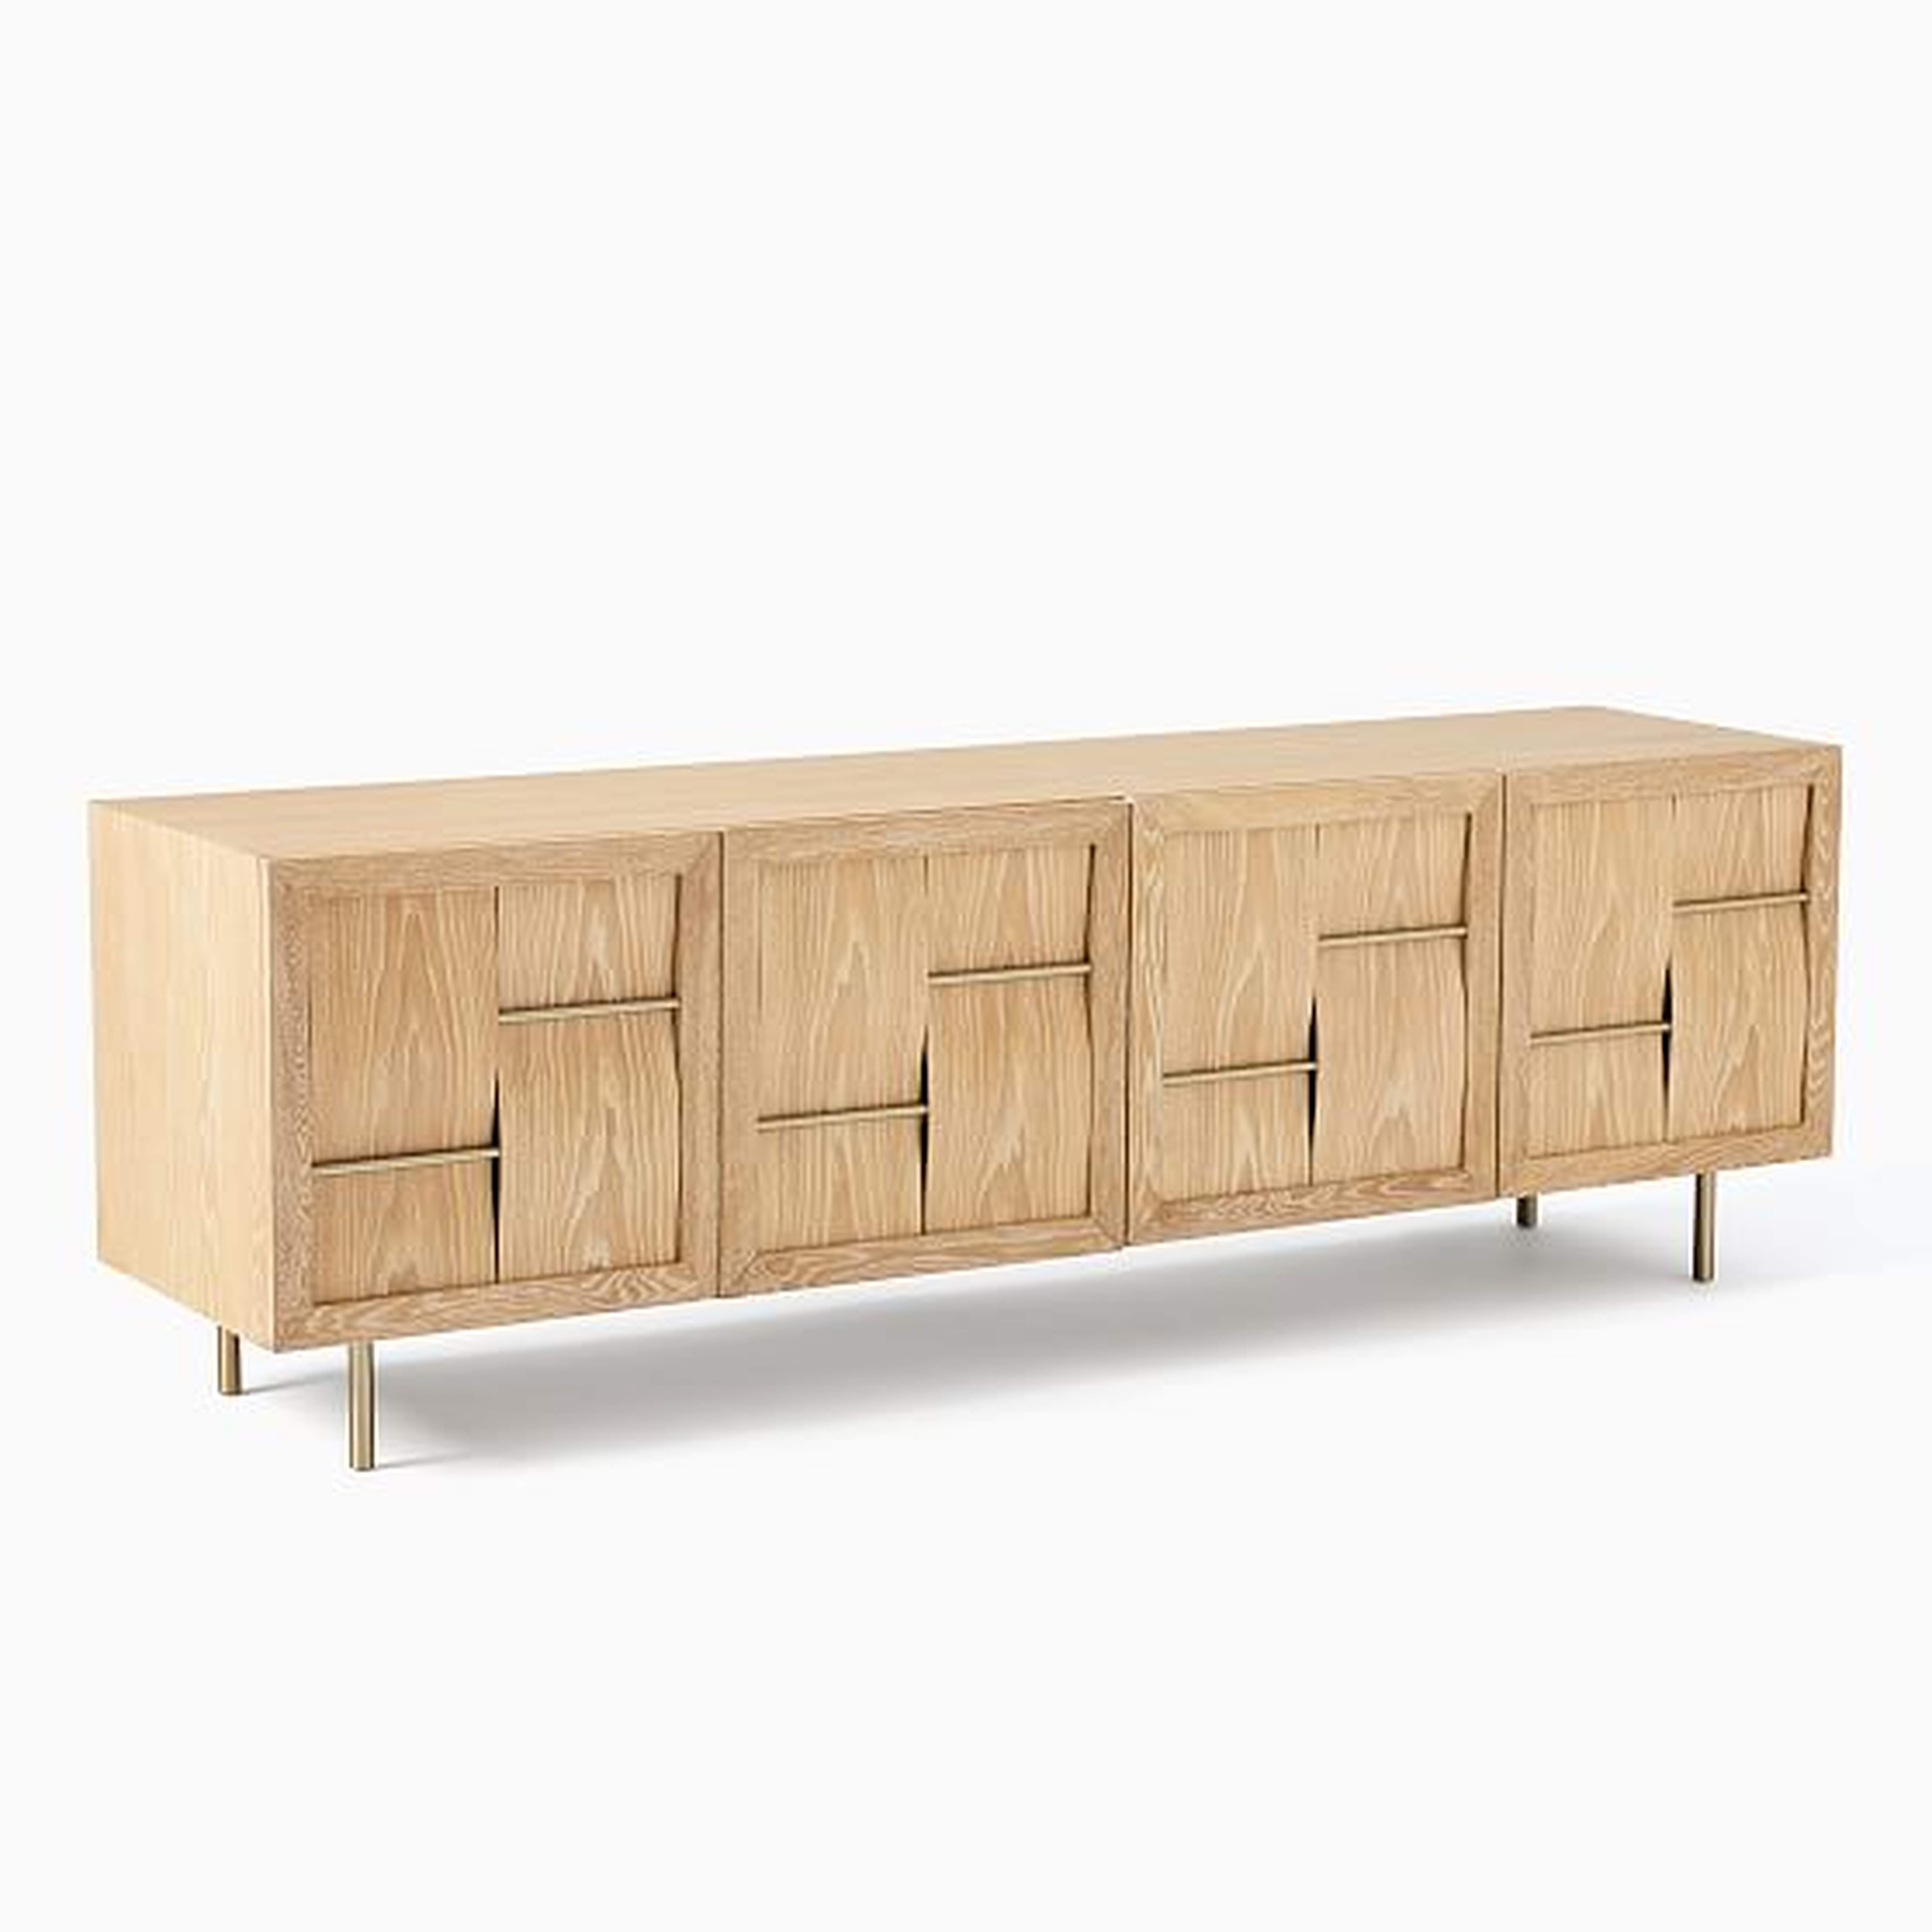 We Atticus Collection Washed Oak Brass 80 Inch Media - West Elm